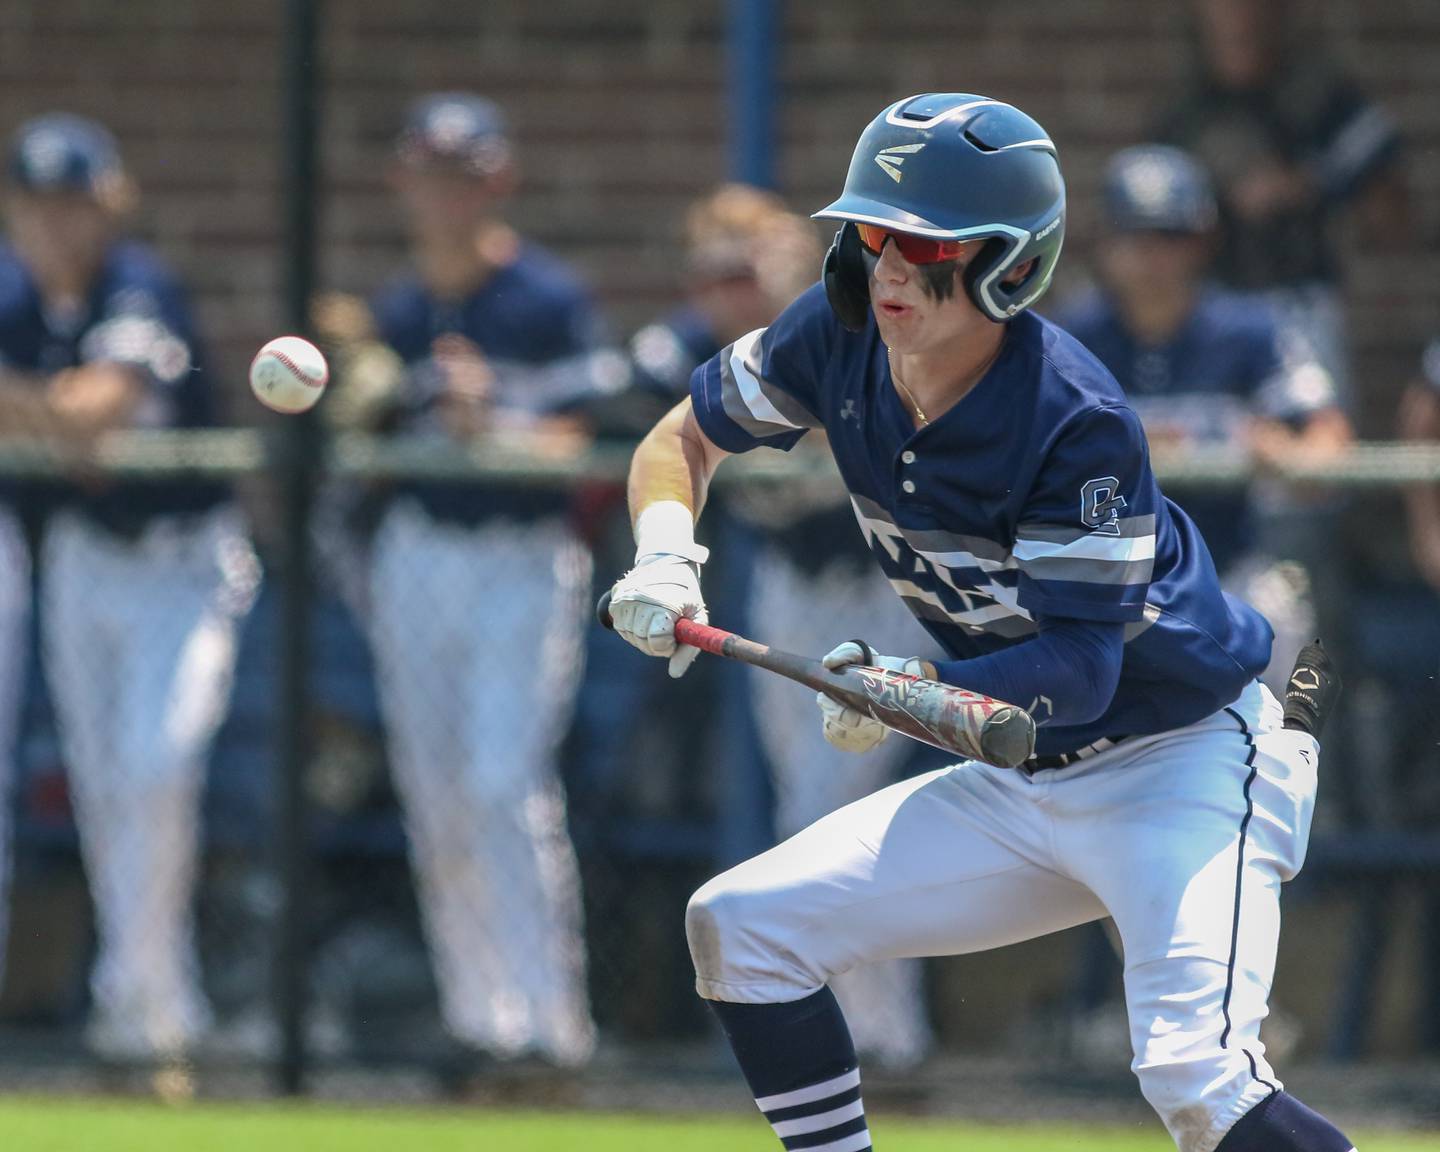 Oswego East's Cody Haynes (13) offers a bunt during Class 4A Romeoville Sectional final game between Oswego East at Oswego.  June 3, 2023.